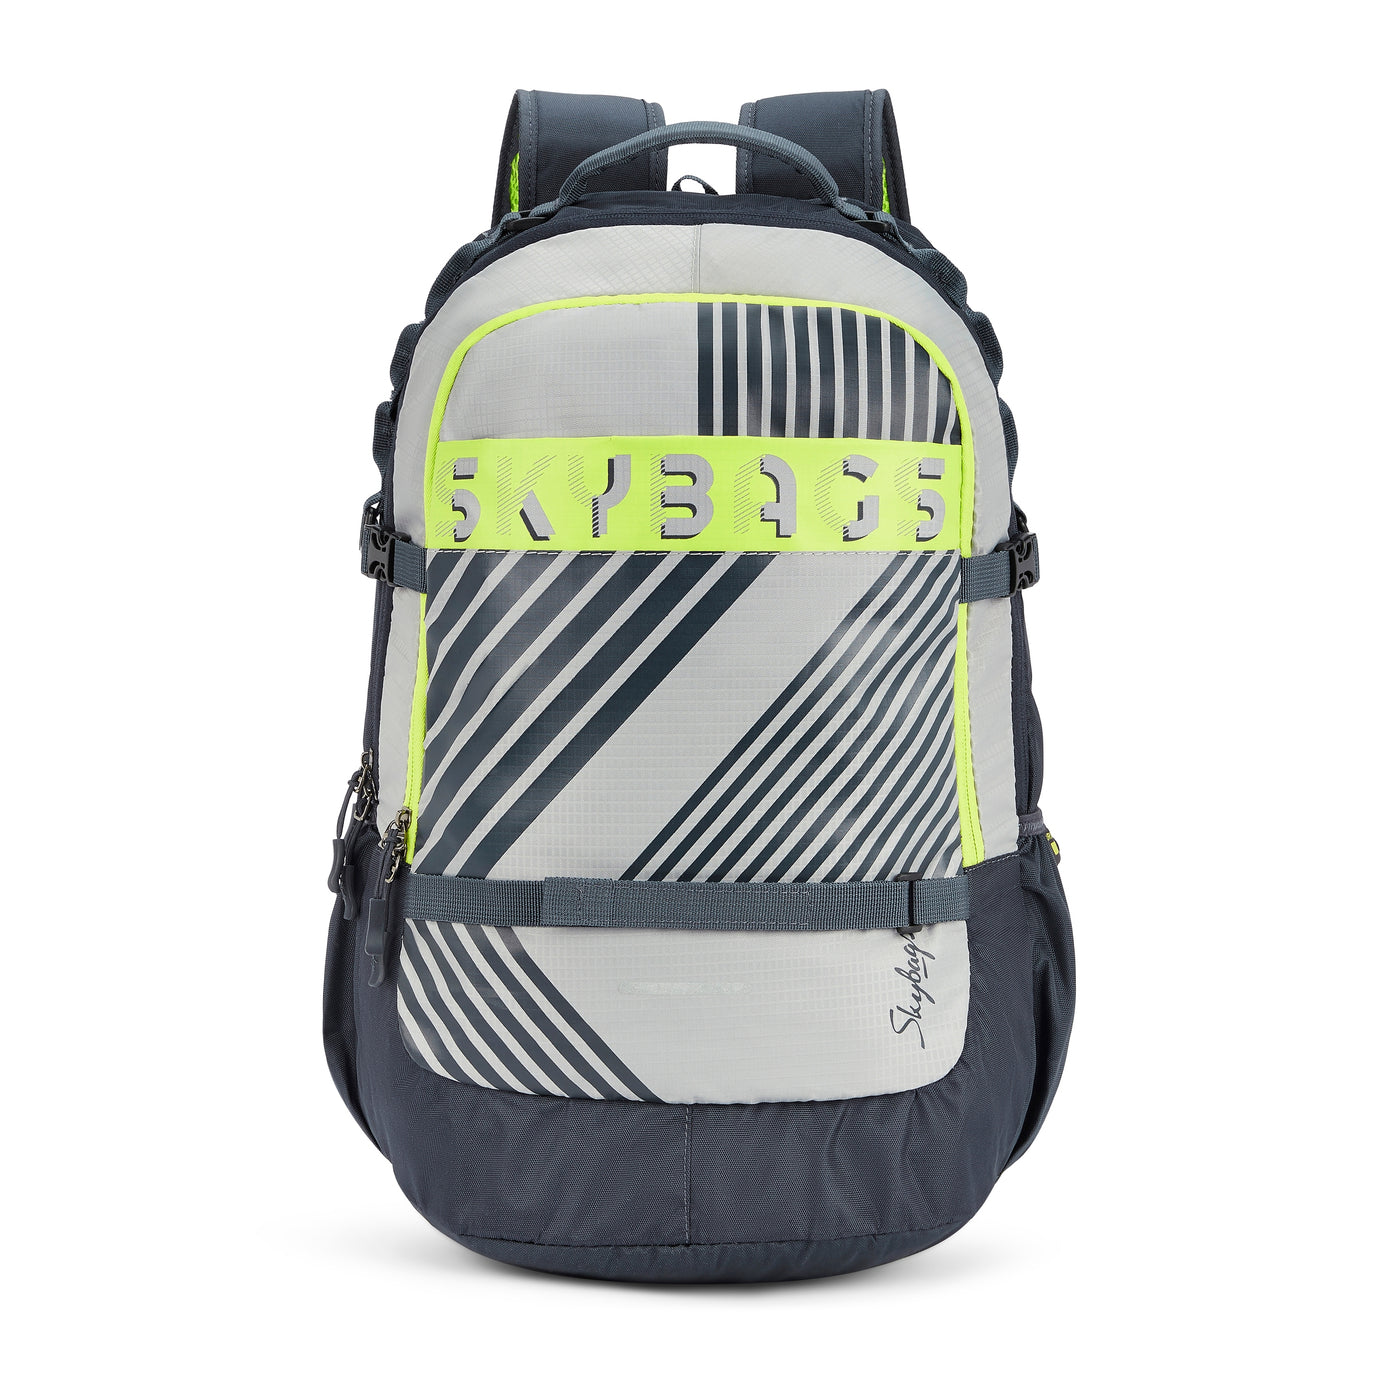 Skybags Cruze XL "College Laptop Backpack"